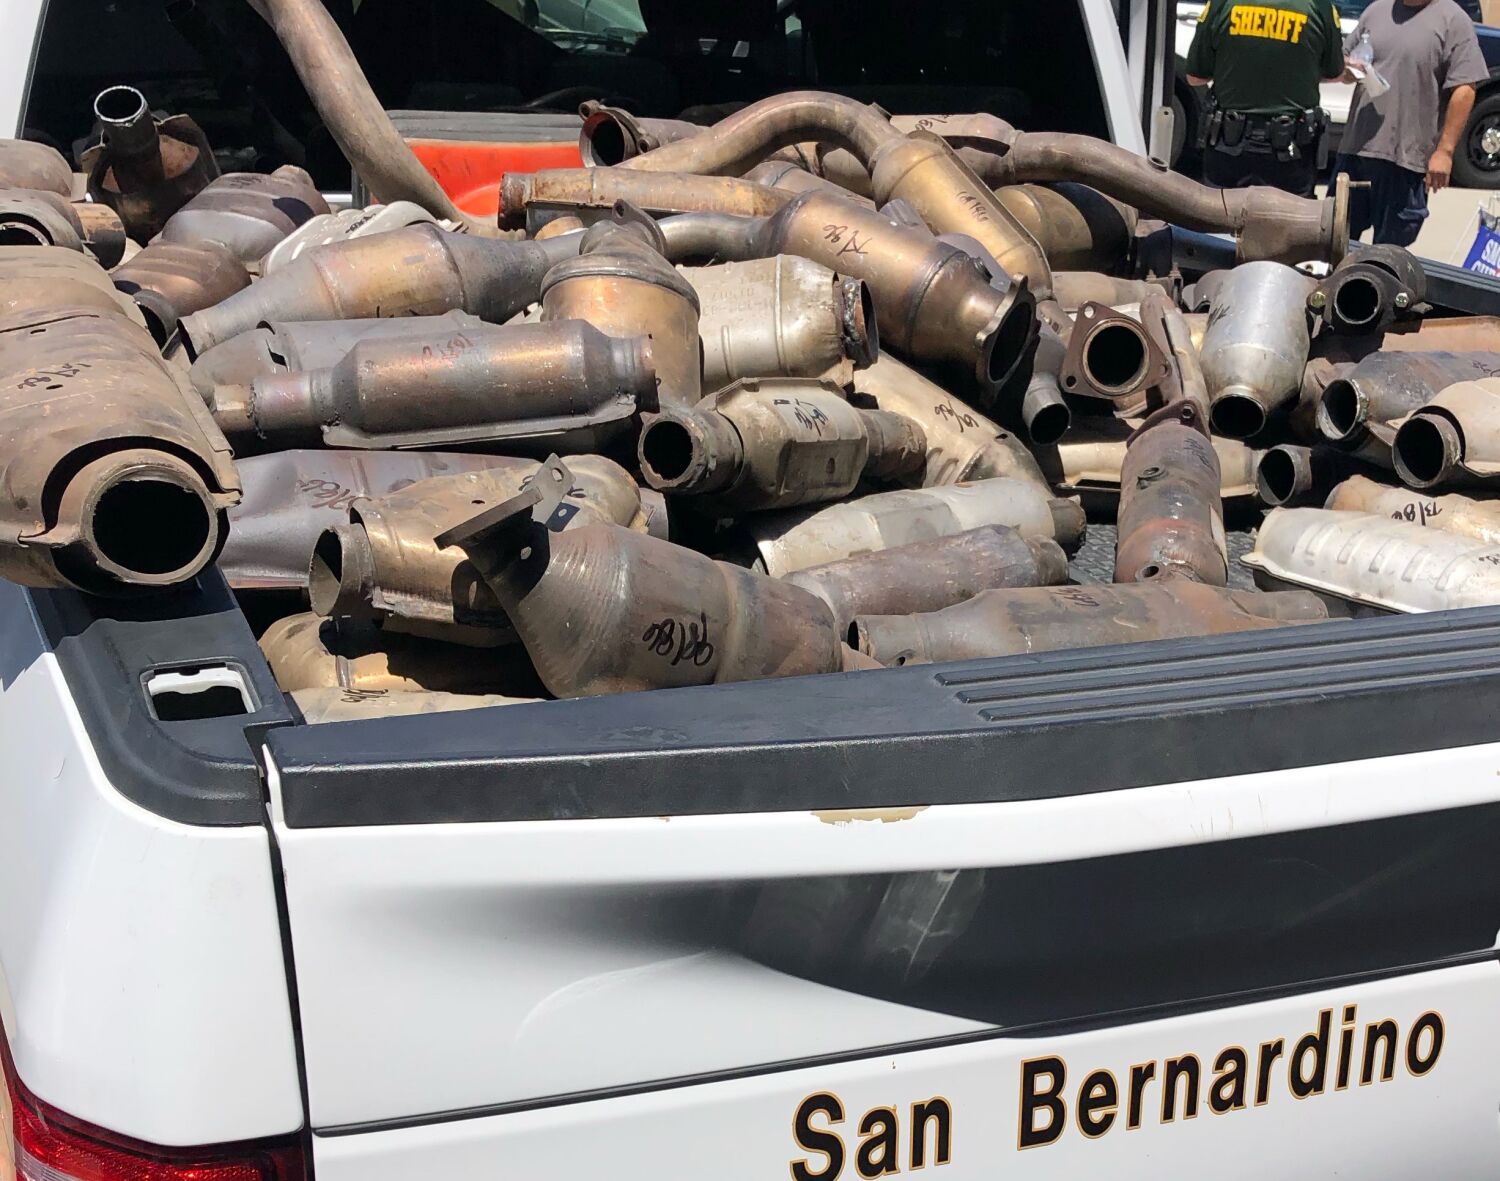 Catalytic converter thieves in L.A. could soon face jail time, $1,000 in fines